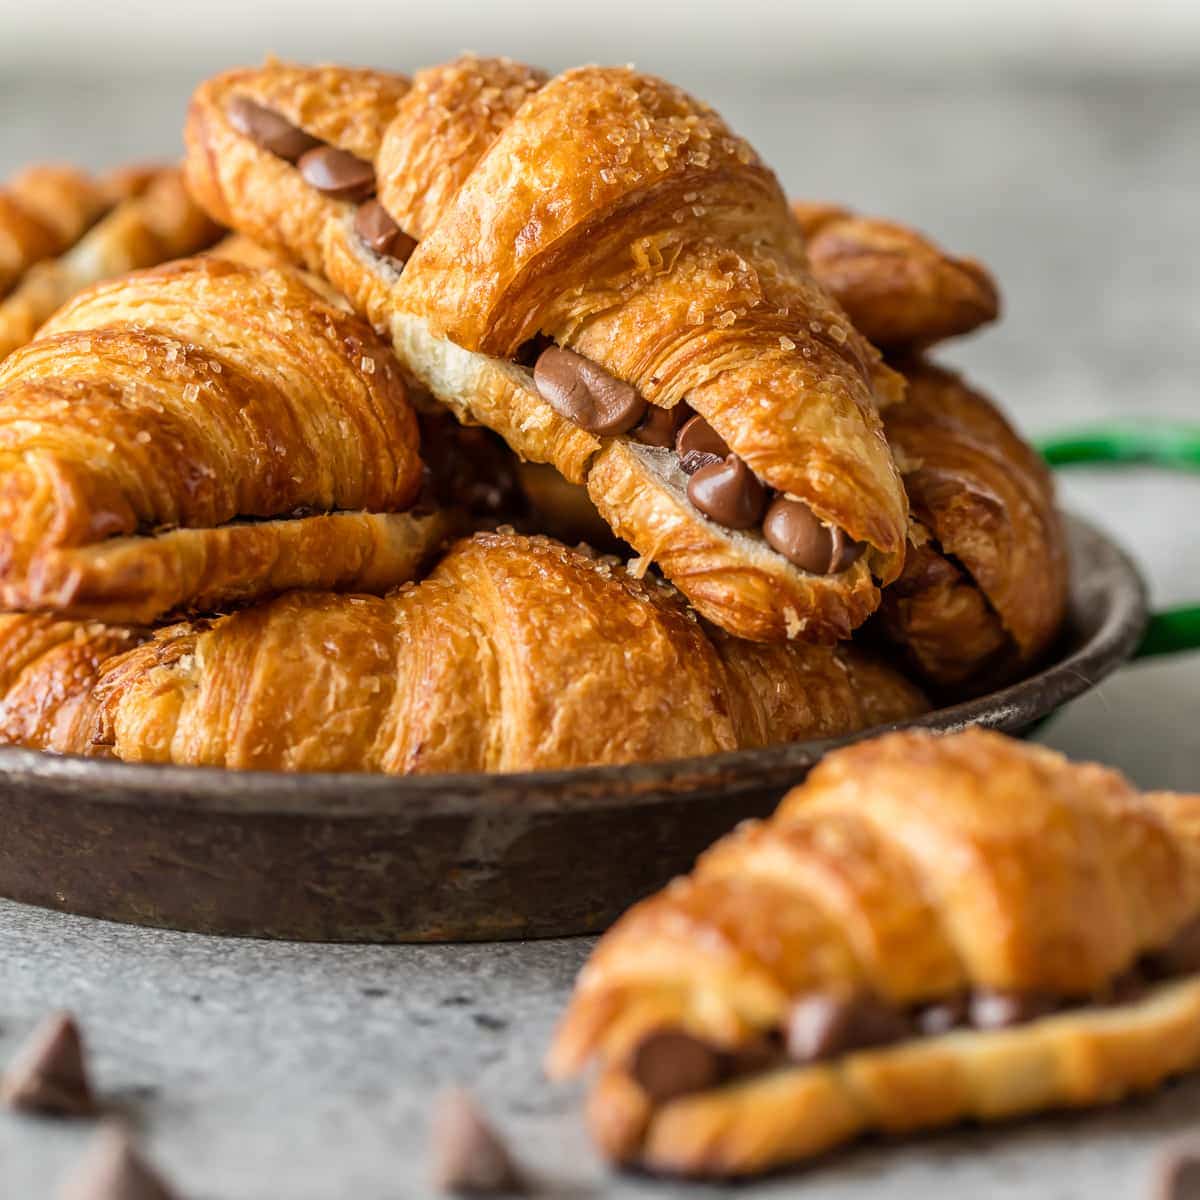 Chocolate Croissant Recipe - Easy Chocolate Croissants for a Crowd